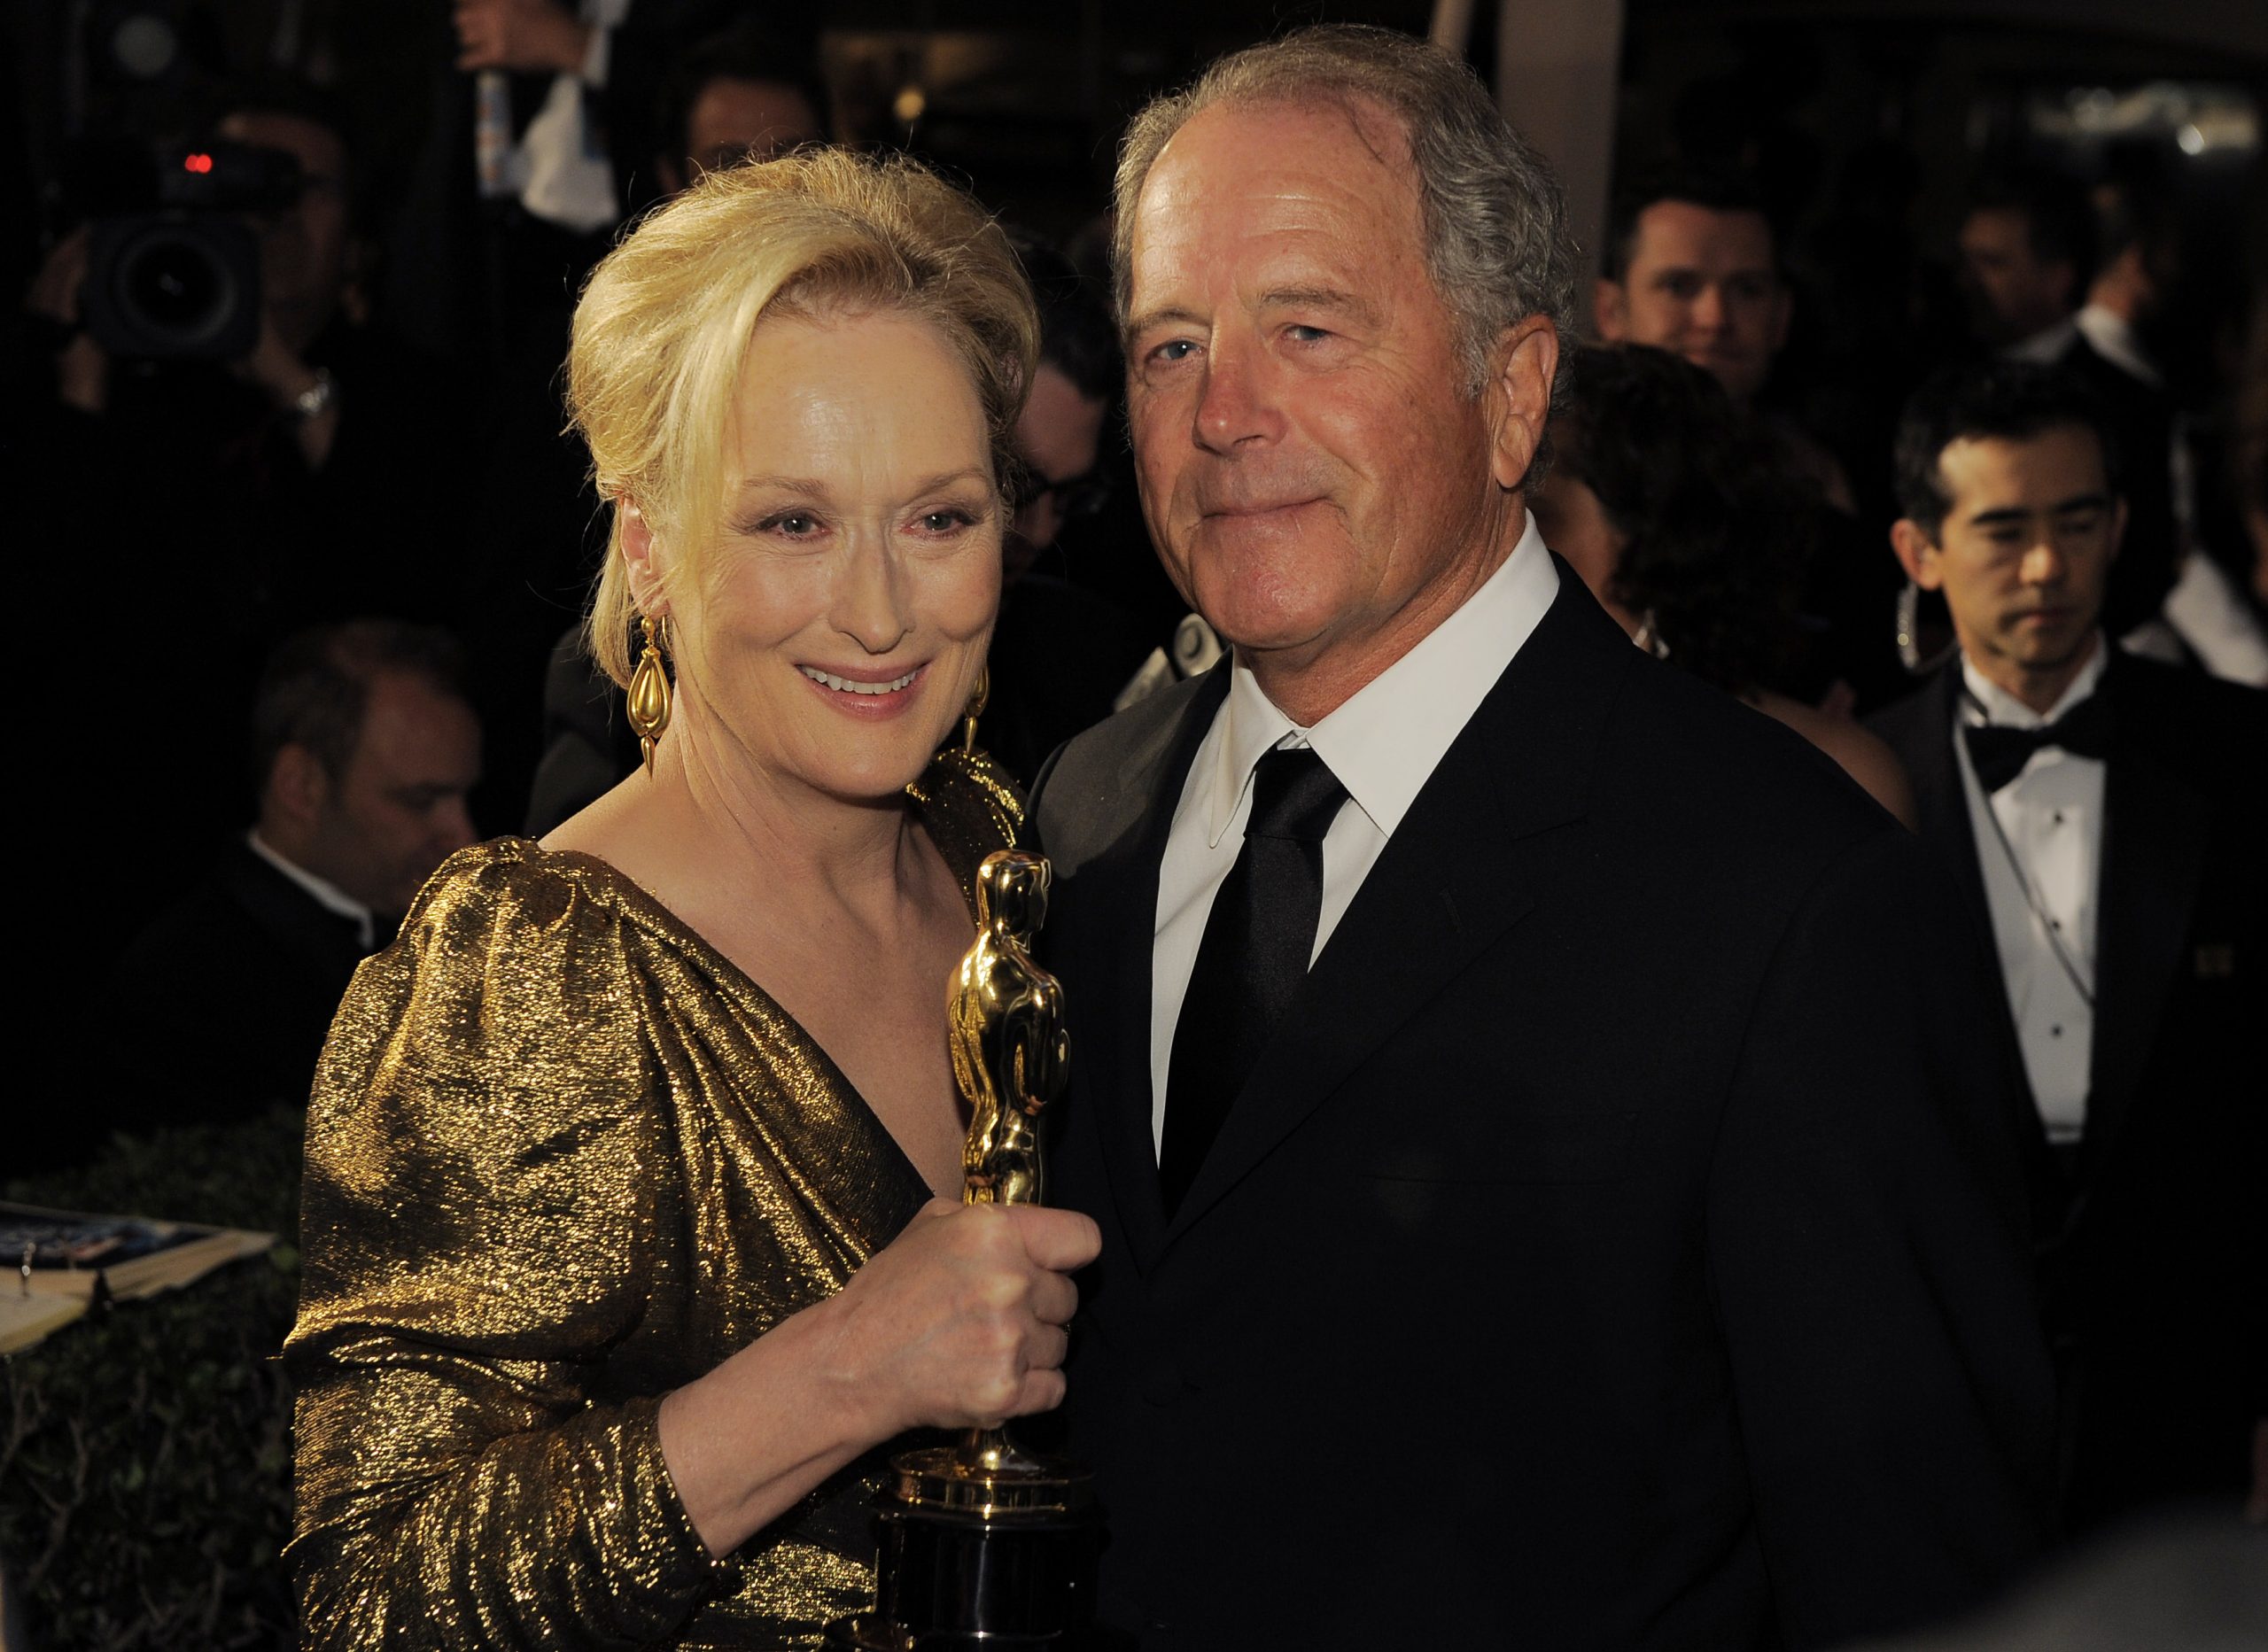 From left, Meryl Streep with the Oscar for best actress in a leading role for "The Iron Lady"  and husband Don Gummer at the Governors Ball following the 84th Academy Awards on Sunday, Feb. 26, 2012, in the Hollywood section of Los Angeles. (AP Photo/Chris Pizzello)